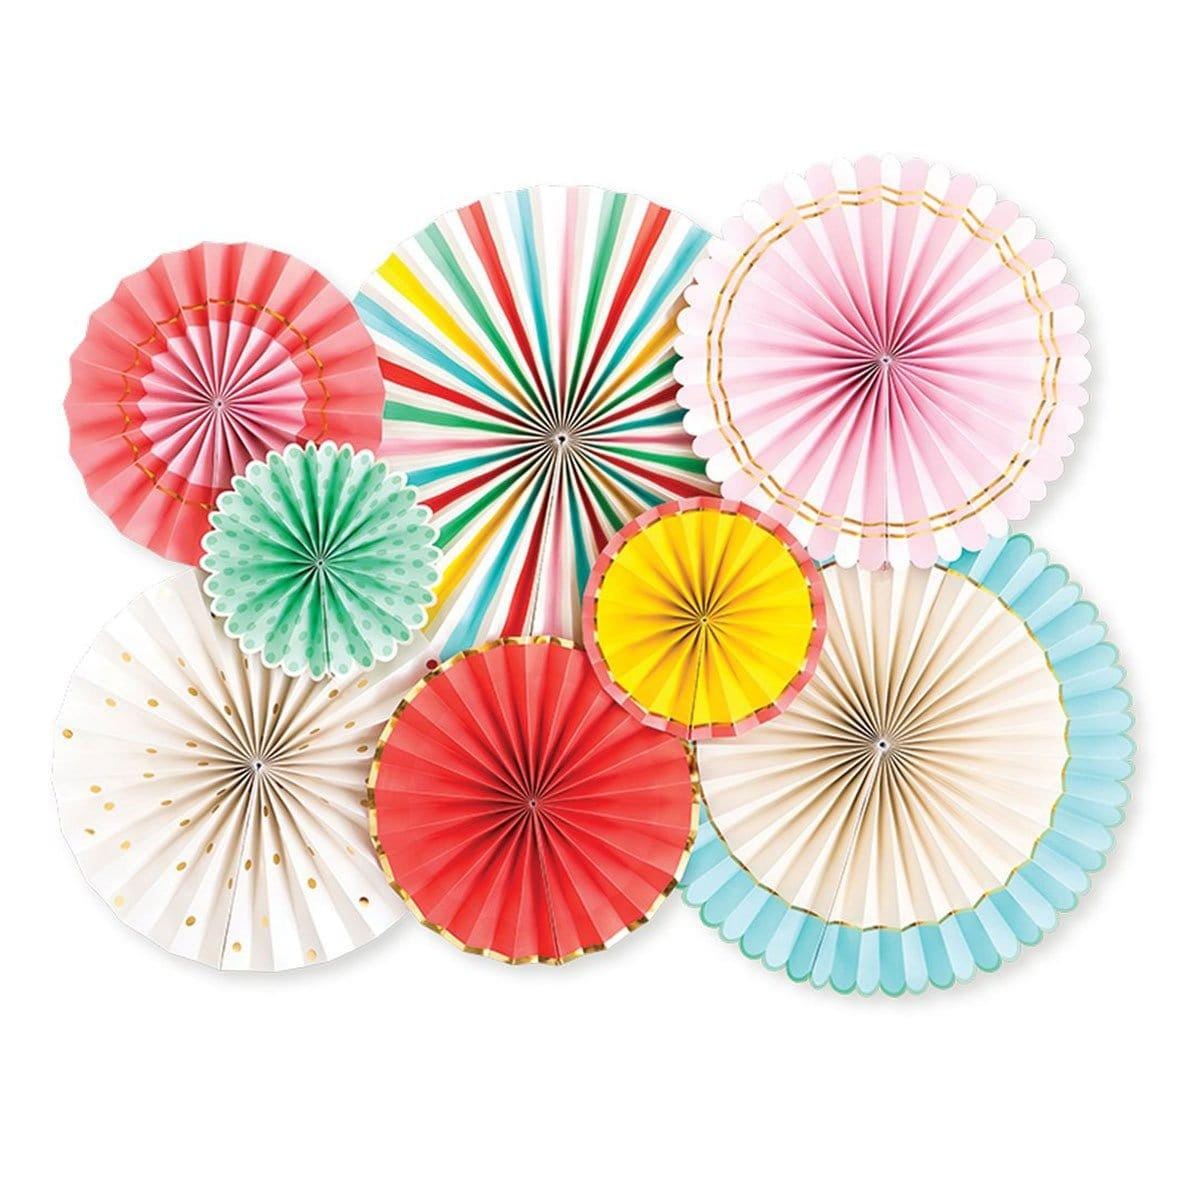 Buy Decorations Hip Hip Hooray - Party Fans 8/pkg sold at Party Expert